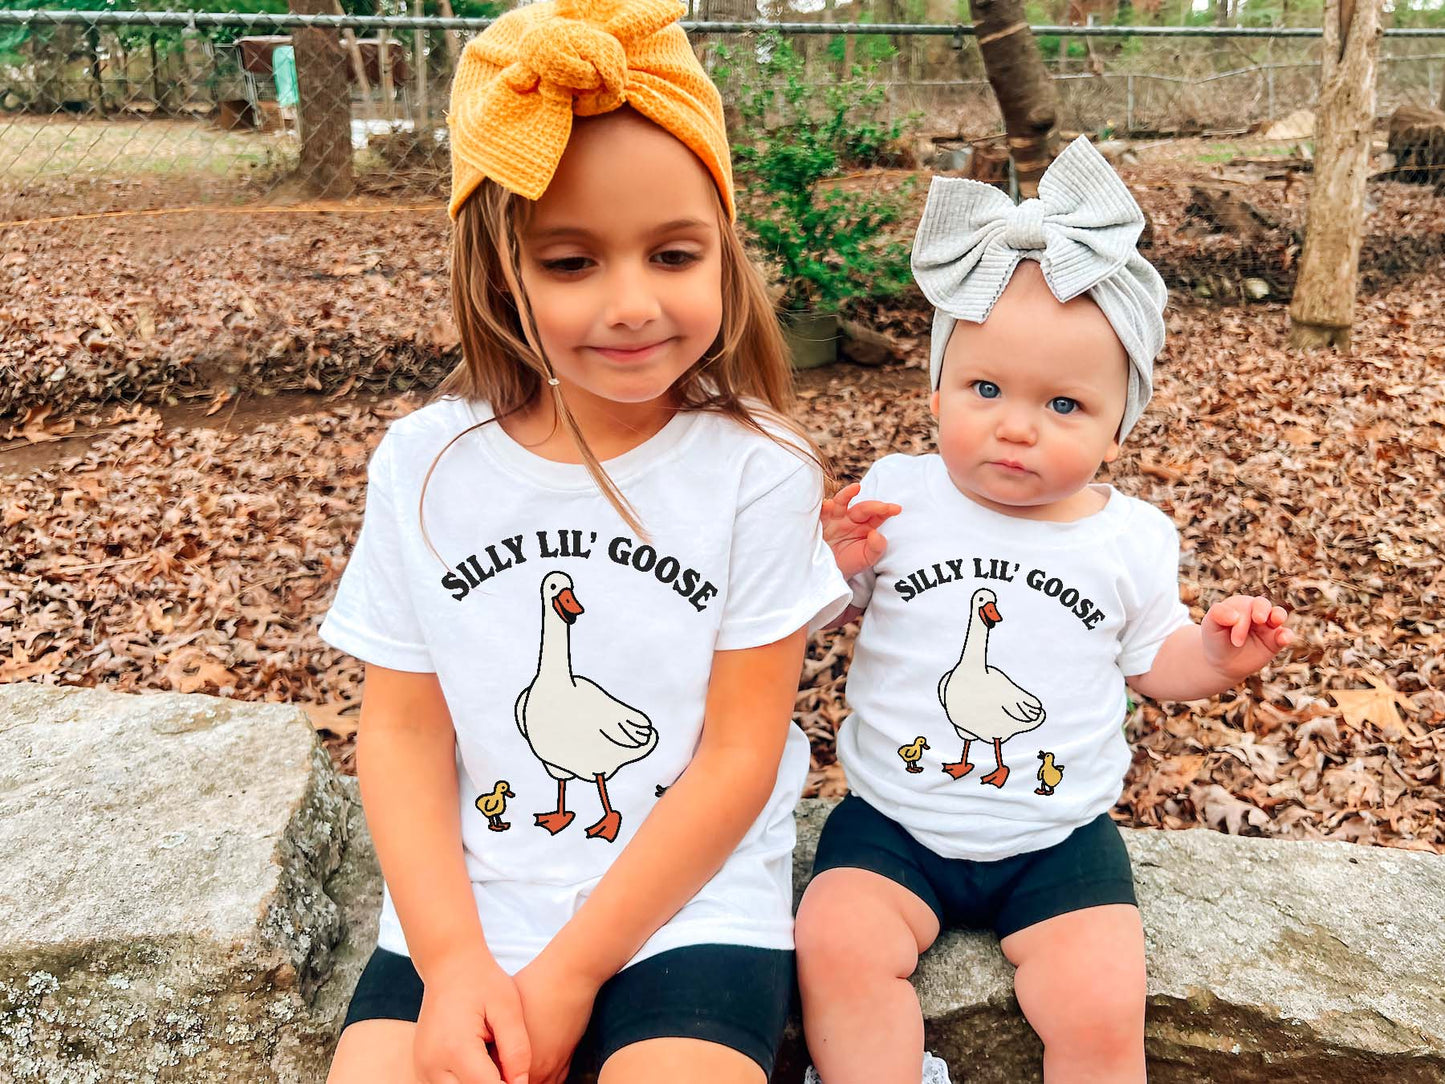 'Silly lil Goose' Kid's Goose T-shirt